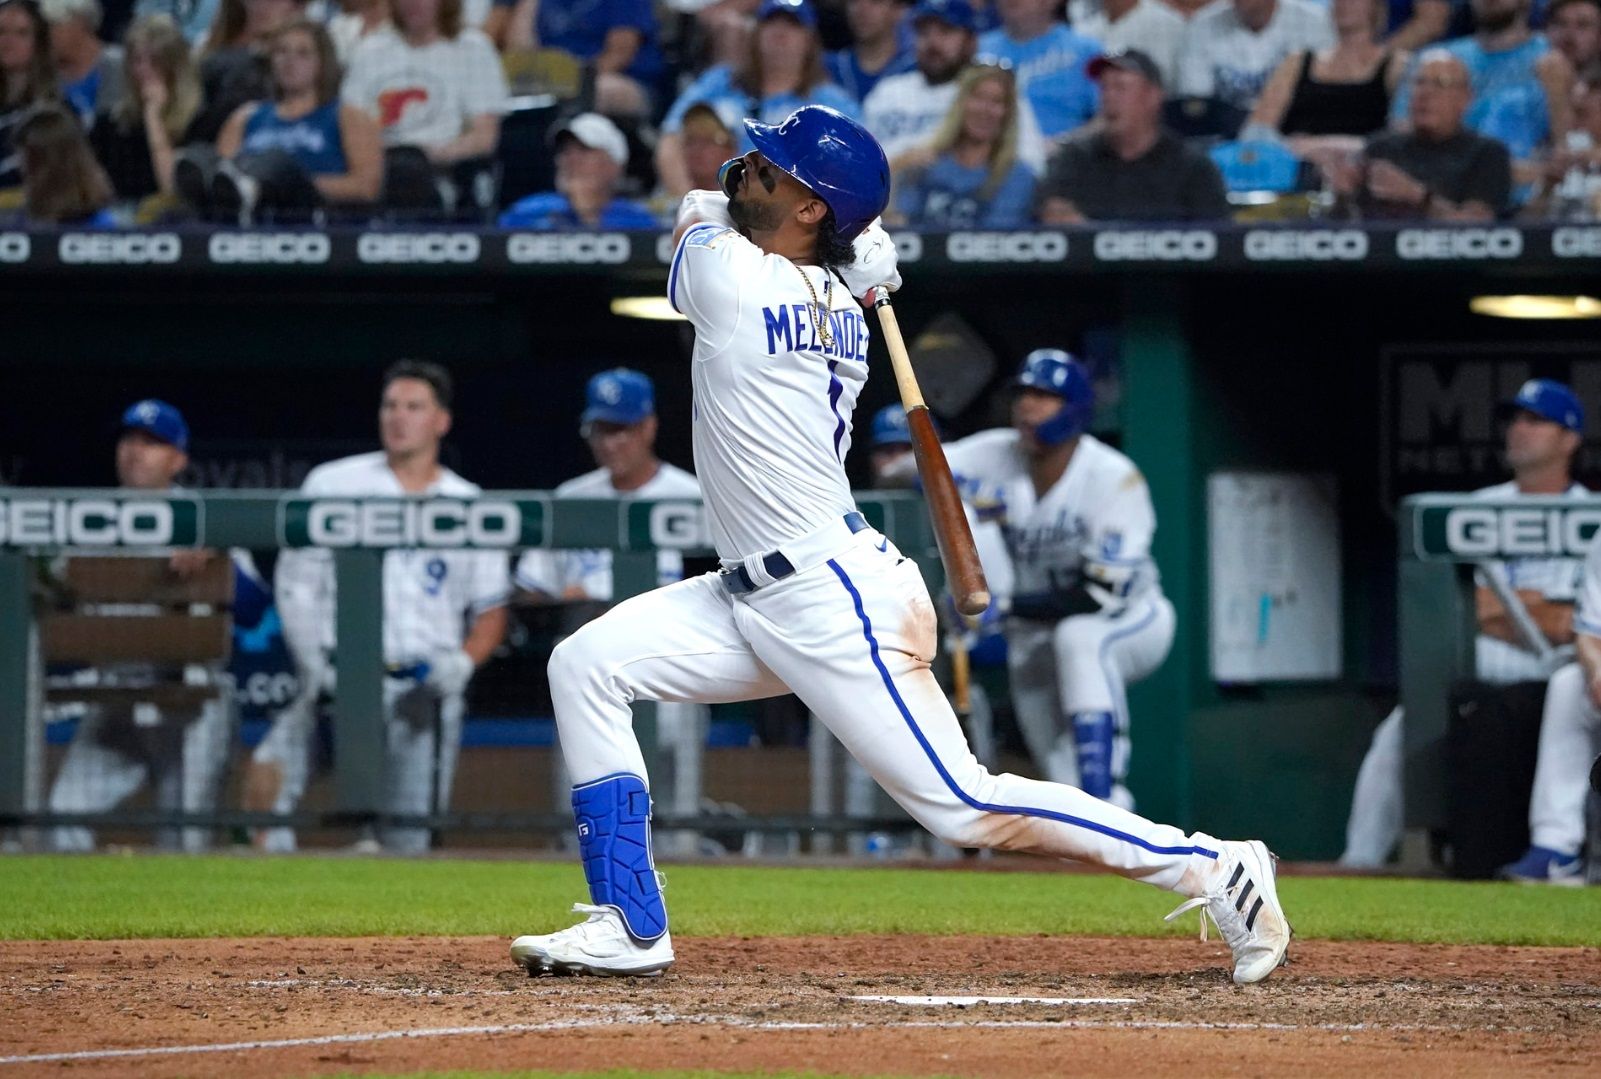 Royals rookie Melendez delivers in 8-3 win over White Sox